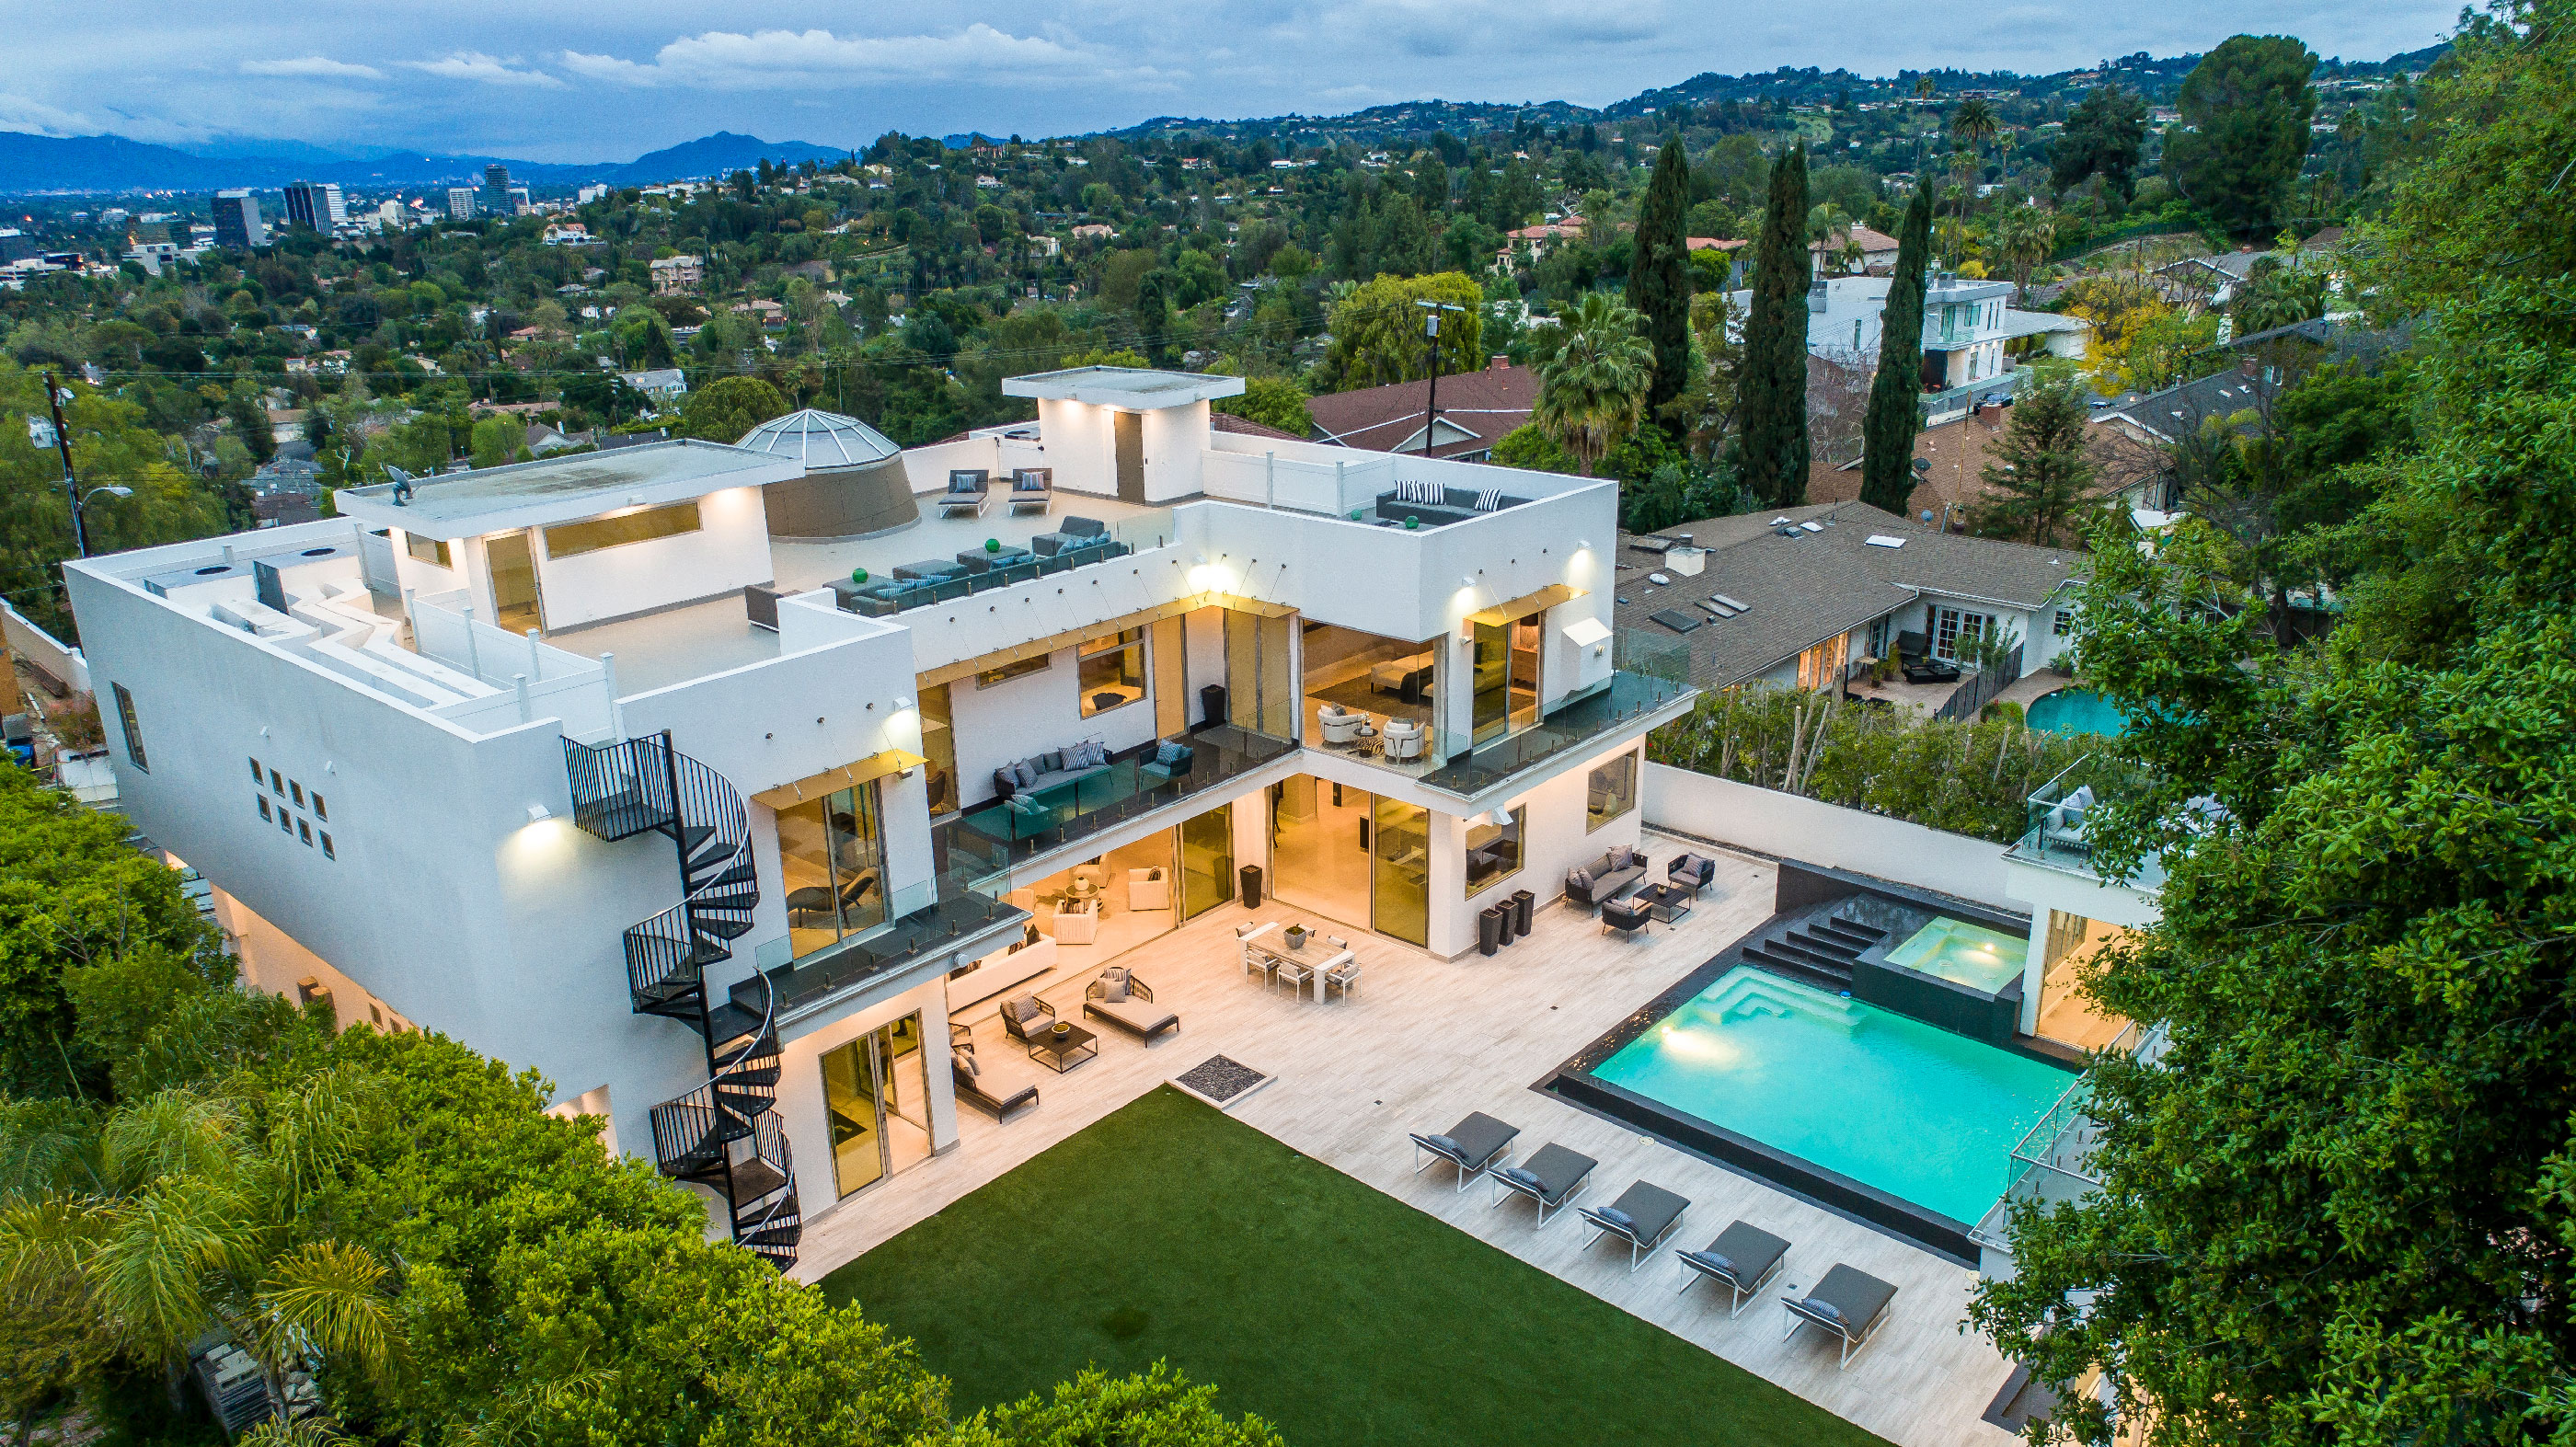 The 'La La Land' Pool Party House Is for Sale. See Inside the Stunning $6.45-Million Mansion